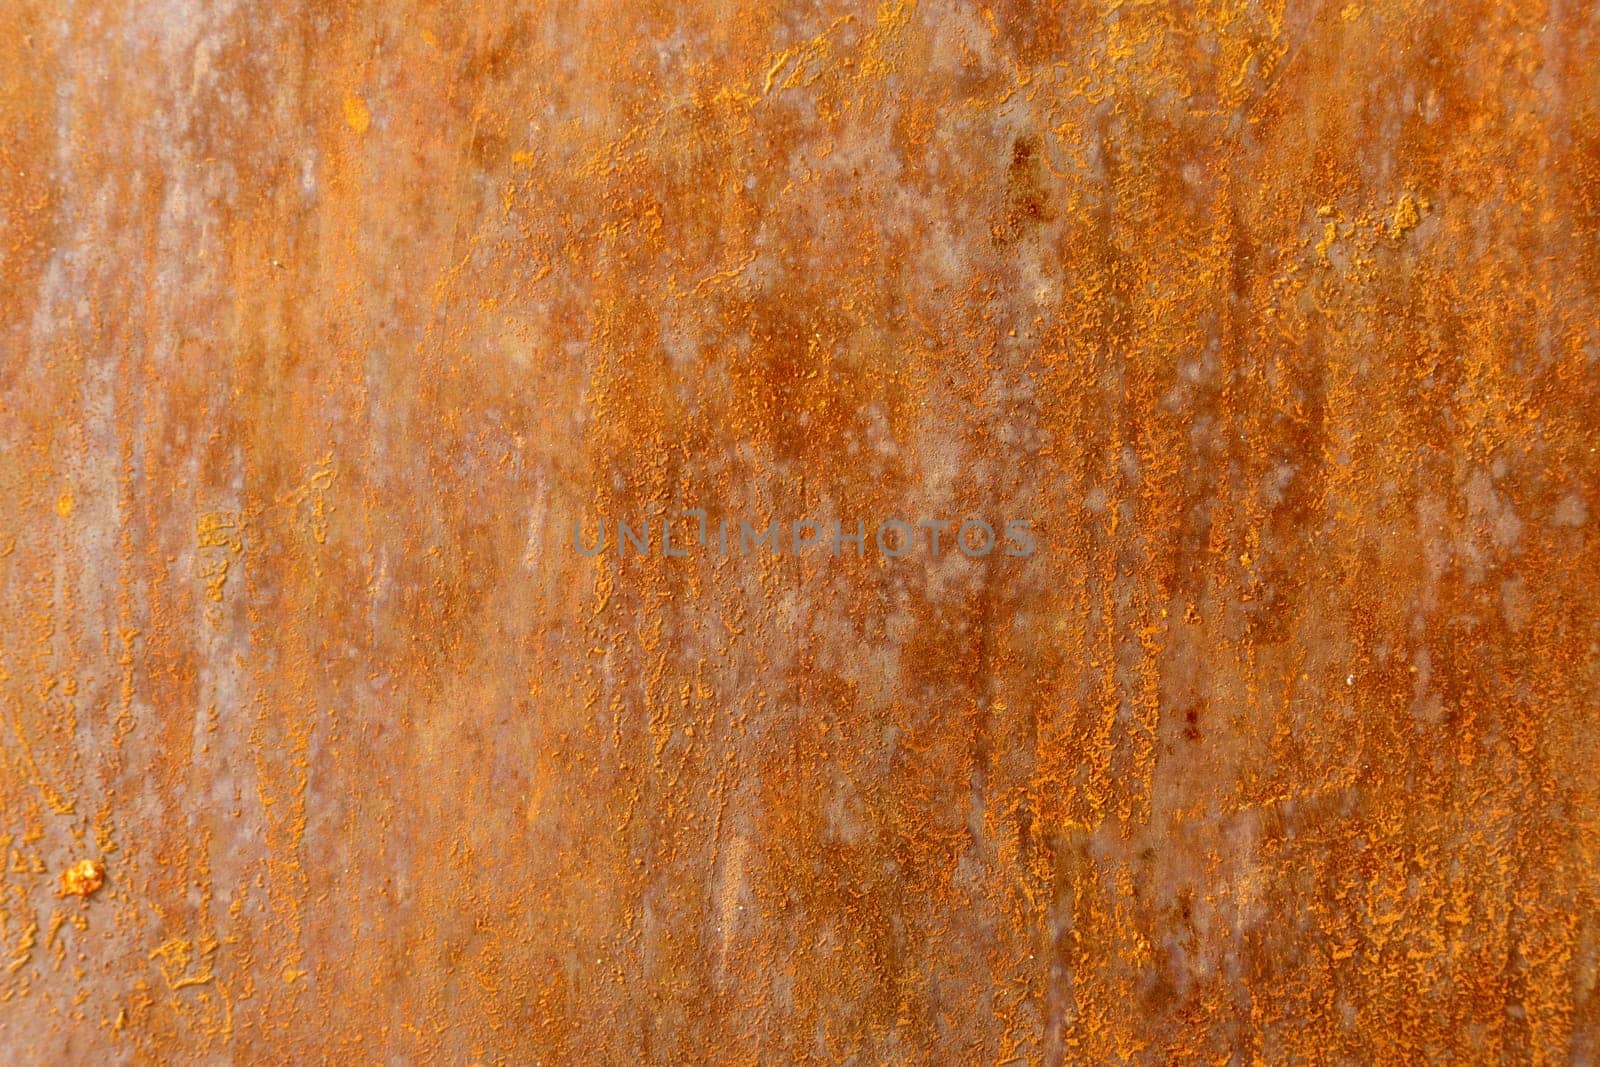 Grunge of rusty metal texture, rust and oxidized metal background. An old metal